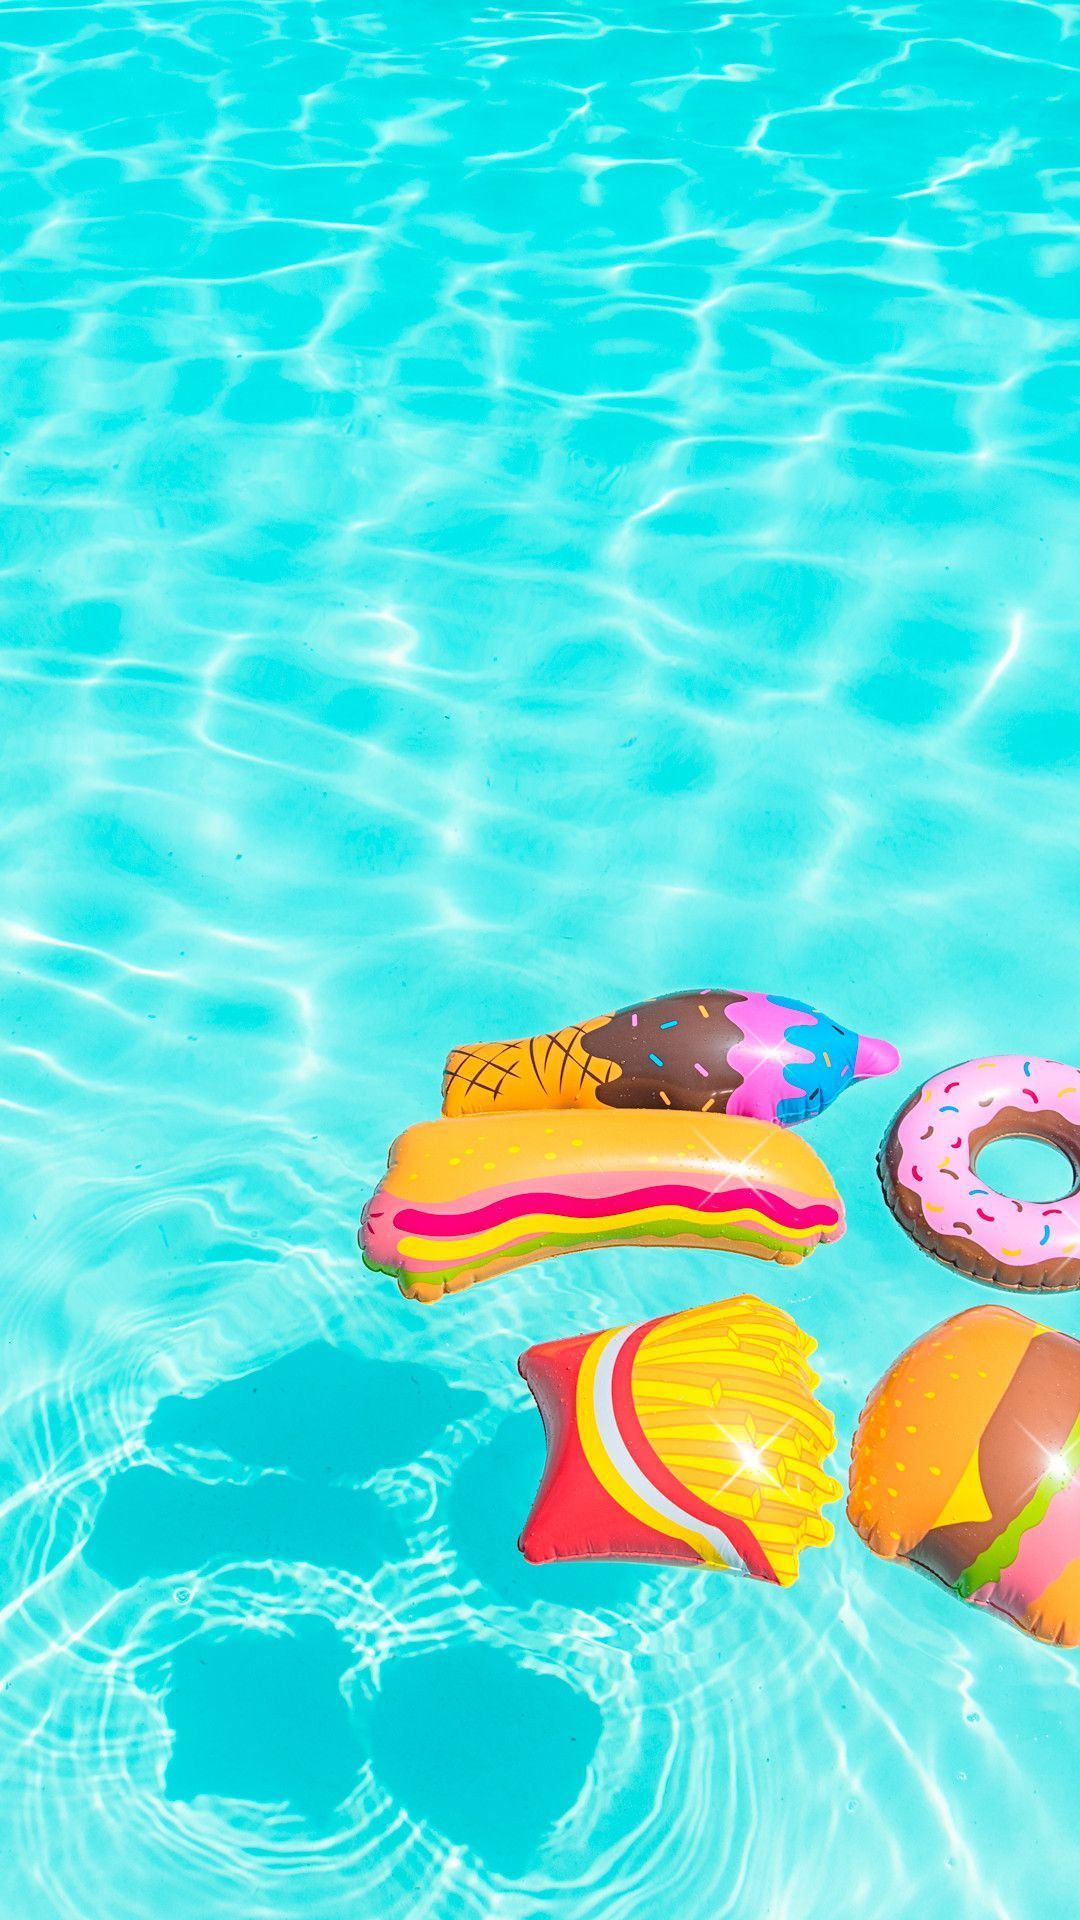 IPhone wallpaper with a pool and inflatable food. - Swimming pool, summer, bright